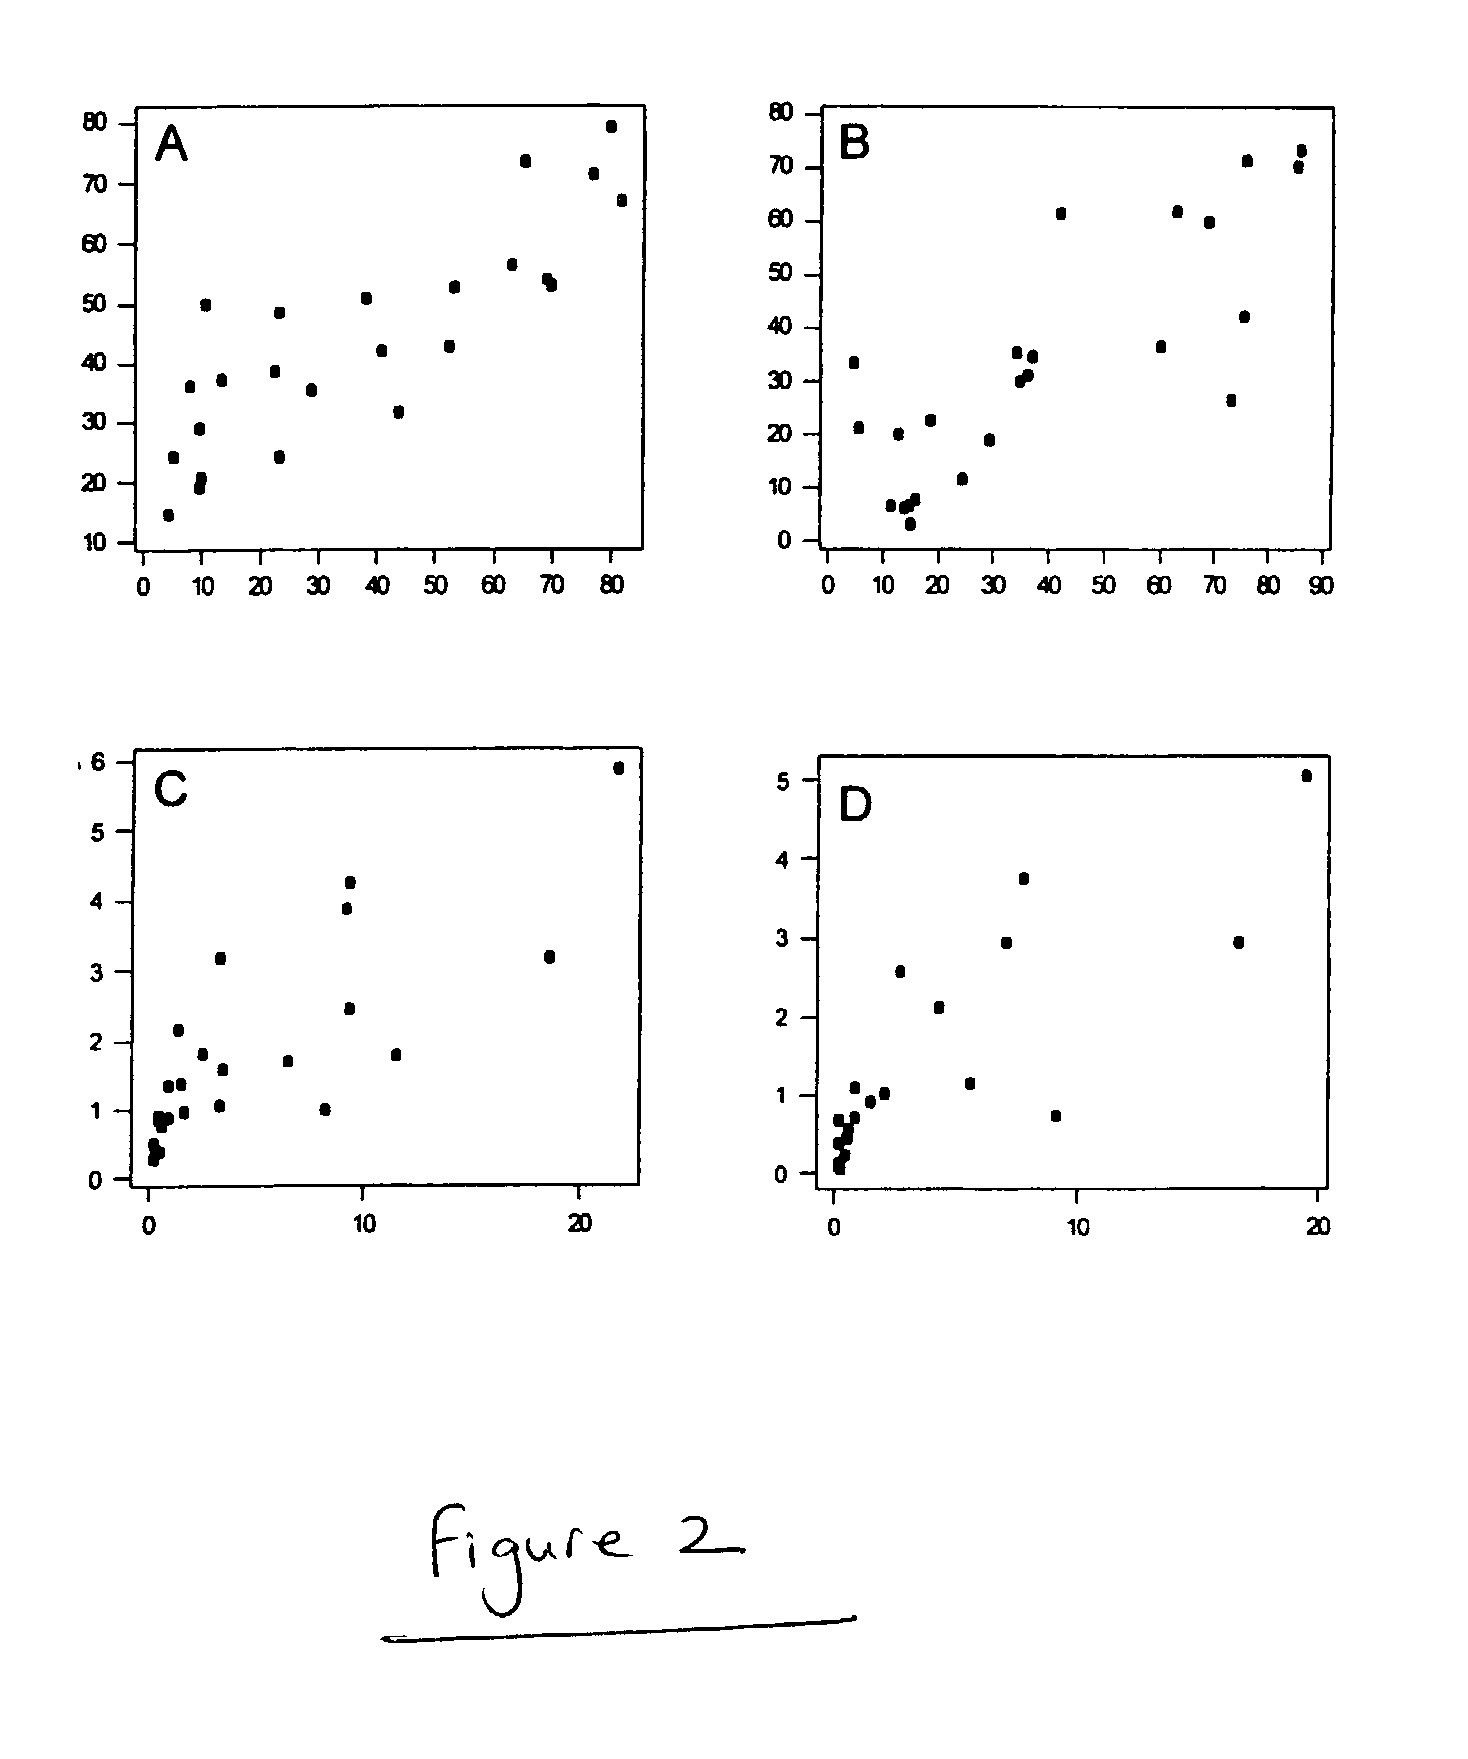 Method for diagnosis of, and determination of susceptibility to bovine mastitis